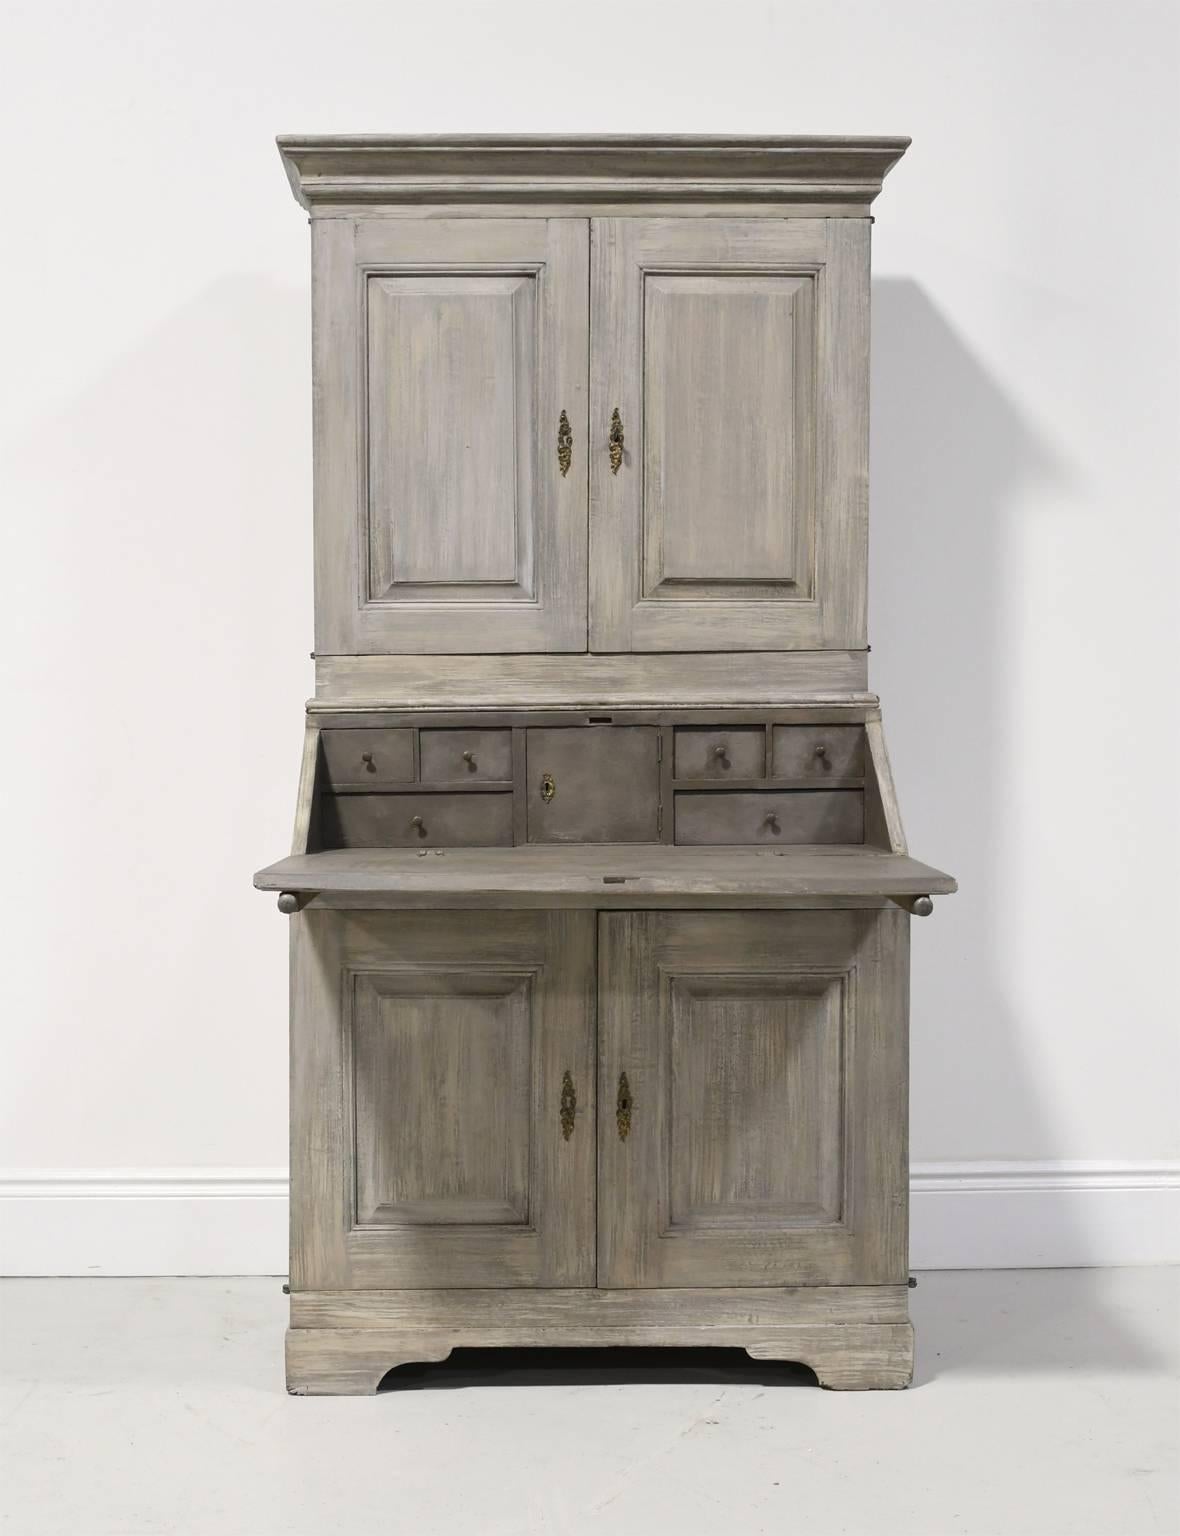 A very beautiful Gustavian secretary with fall-front opening to a desk offering six interior drawers surrounding a small cabinet door for valuables. A bookcase or cupboard rests over the desk with a cabinet below for added storage. The grey-painted